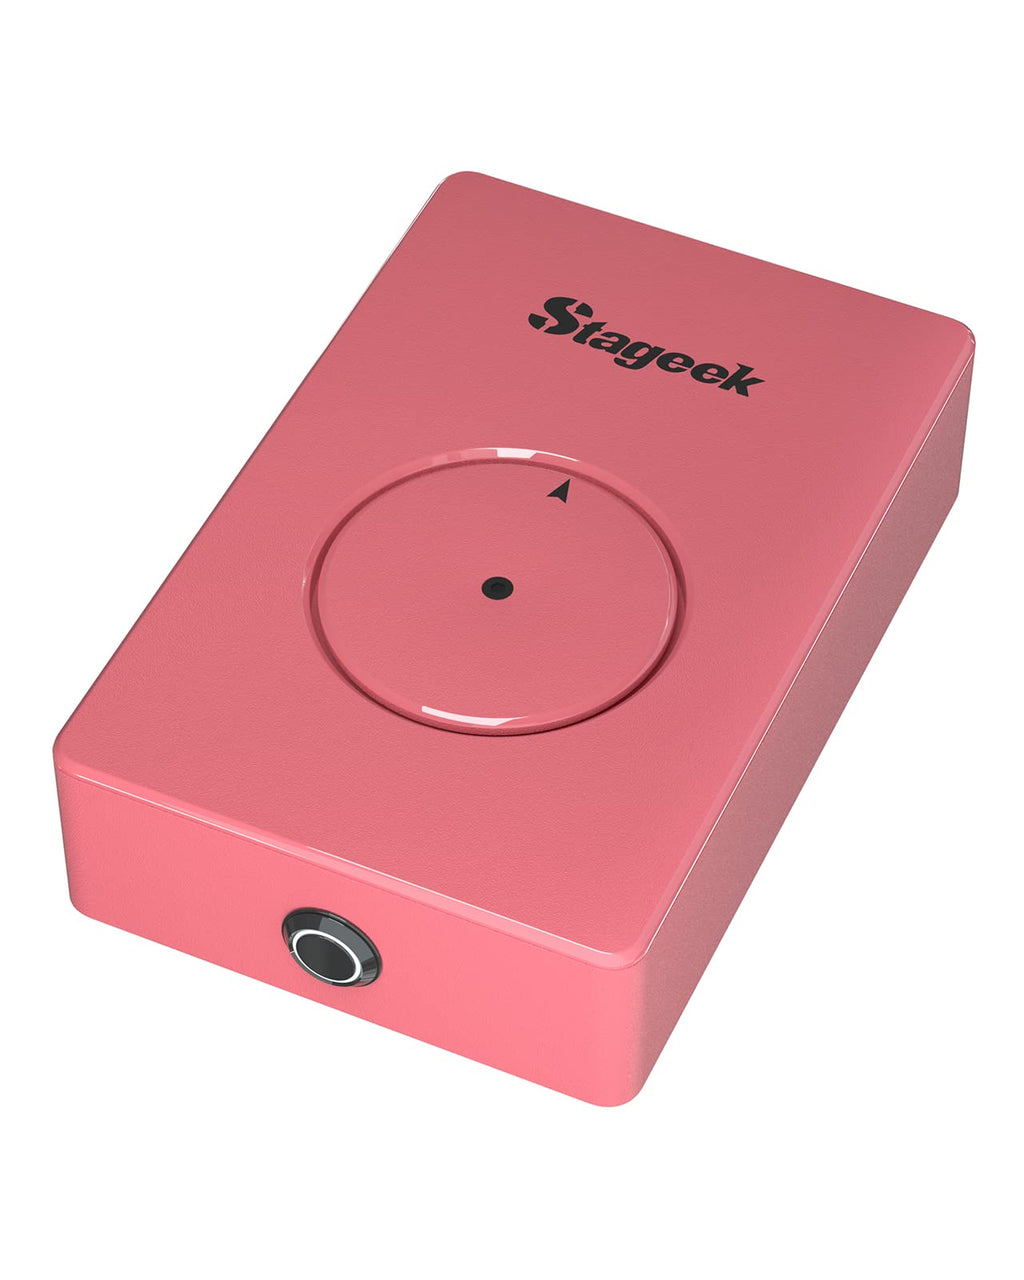 Stageek Mouse Jiggler, Mechanical 100% Undetectable by IT, Mouse Mover with On/Off Switch, Simulates Mouse Movement and Prevents Computer from Going into Sleep, No Software Needed, Plug &Play, Pink